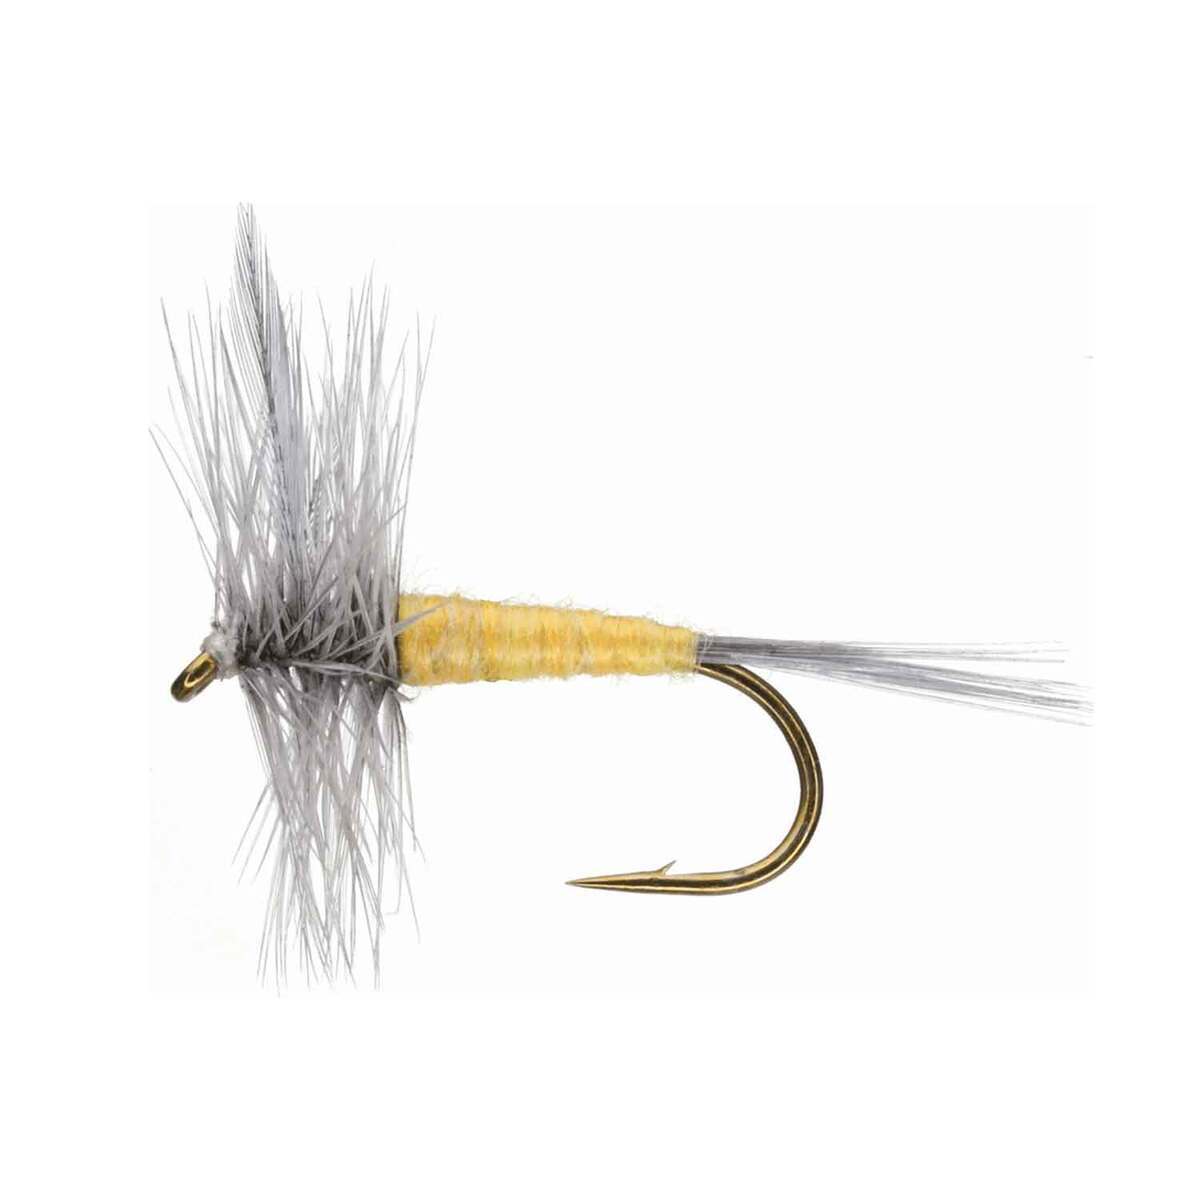 RoundRocks Sulphur Dun Fly - 6 Pack - Yellow 16 by Sportsman's Warehouse